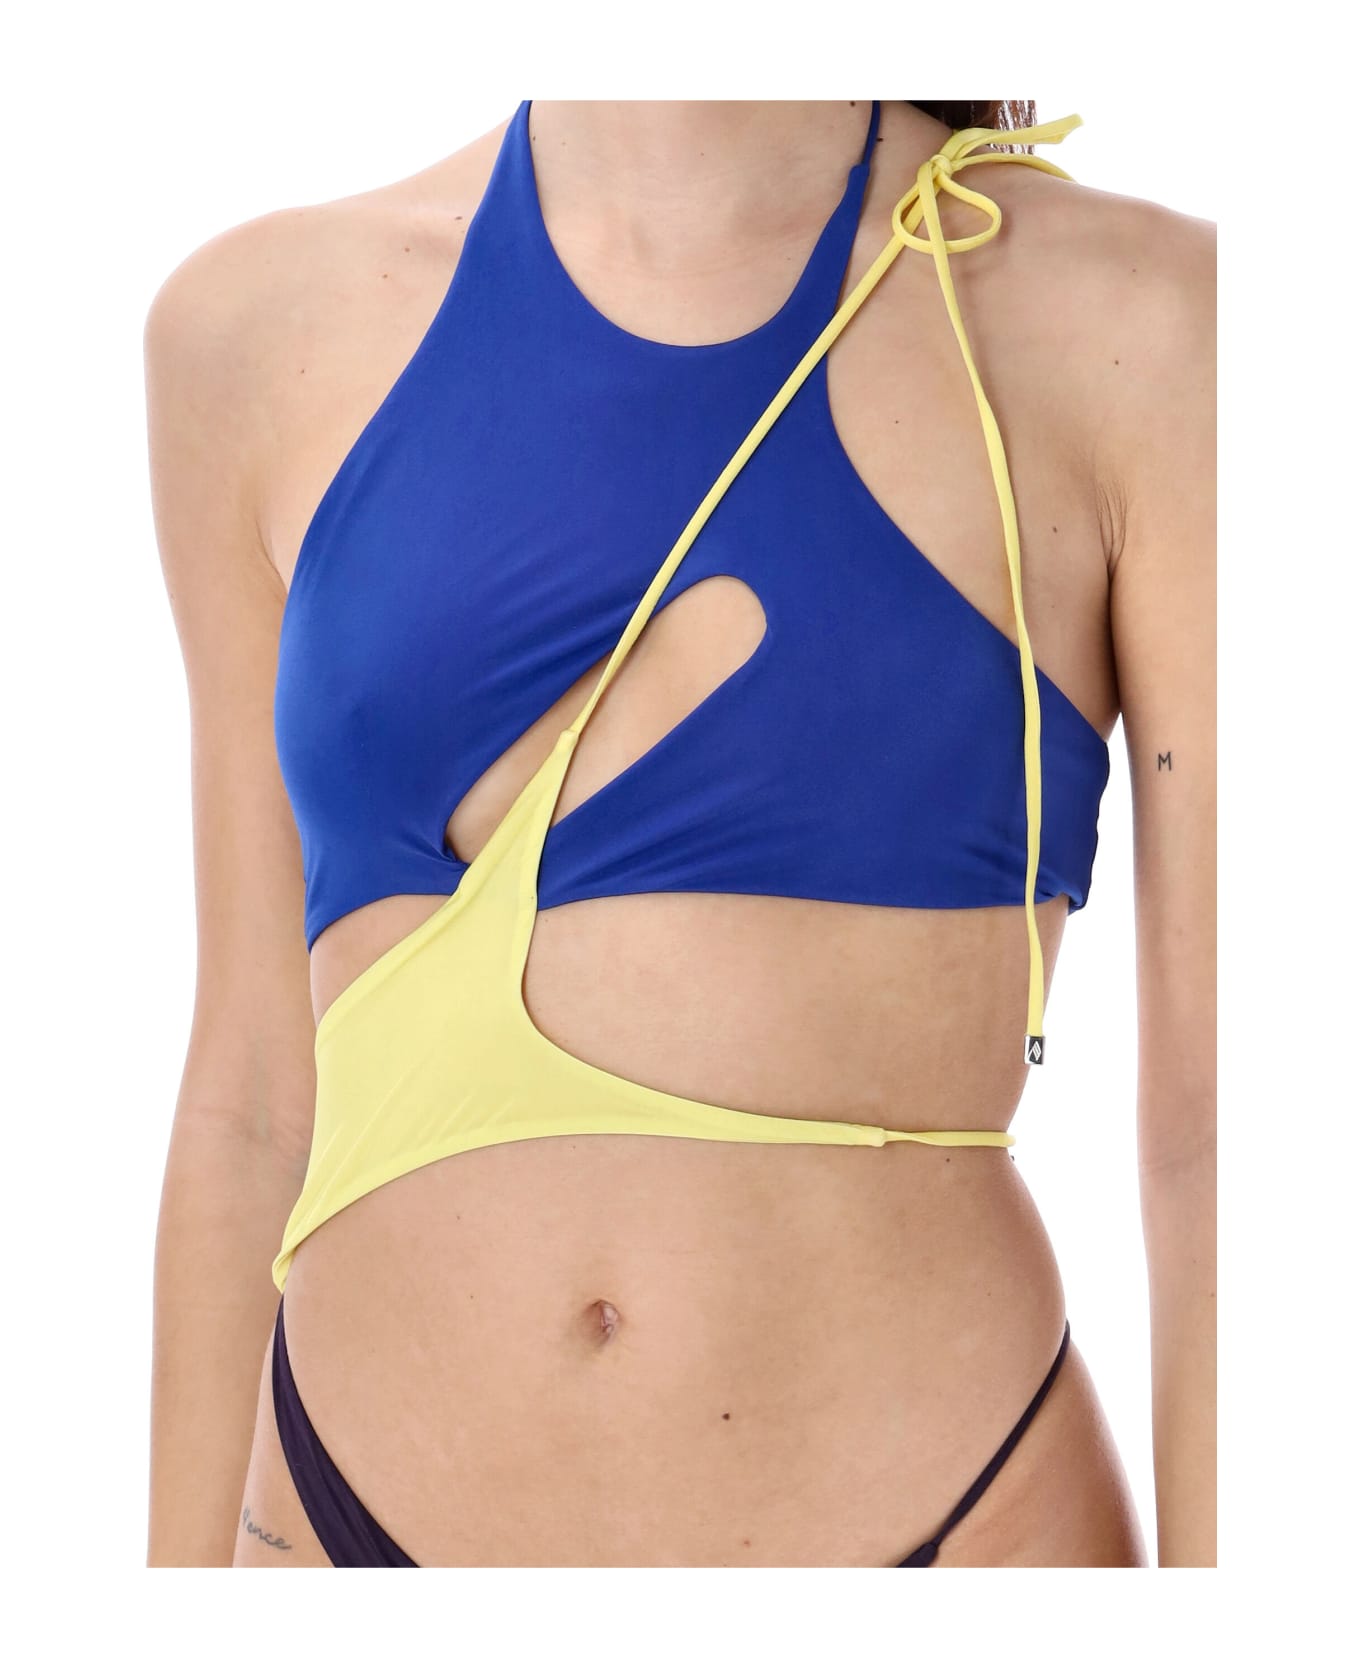 The Attico One Piece Cut Out Swimsuit - GRAPE BLUE YELLOW 水着